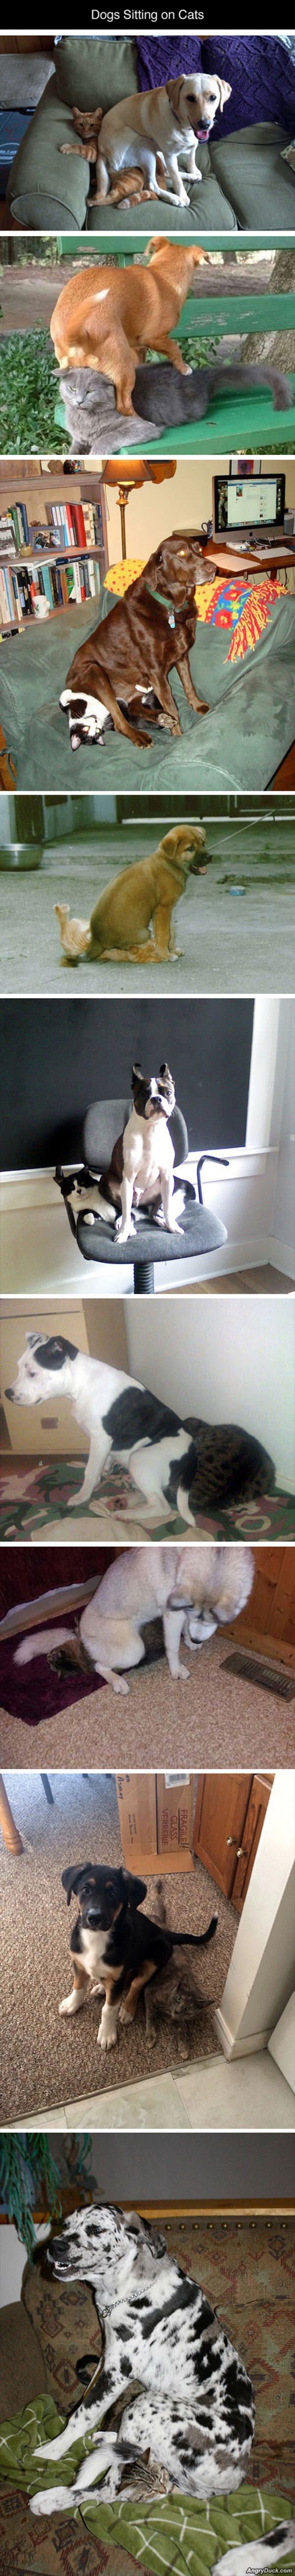 Dogs Sitting On Cats